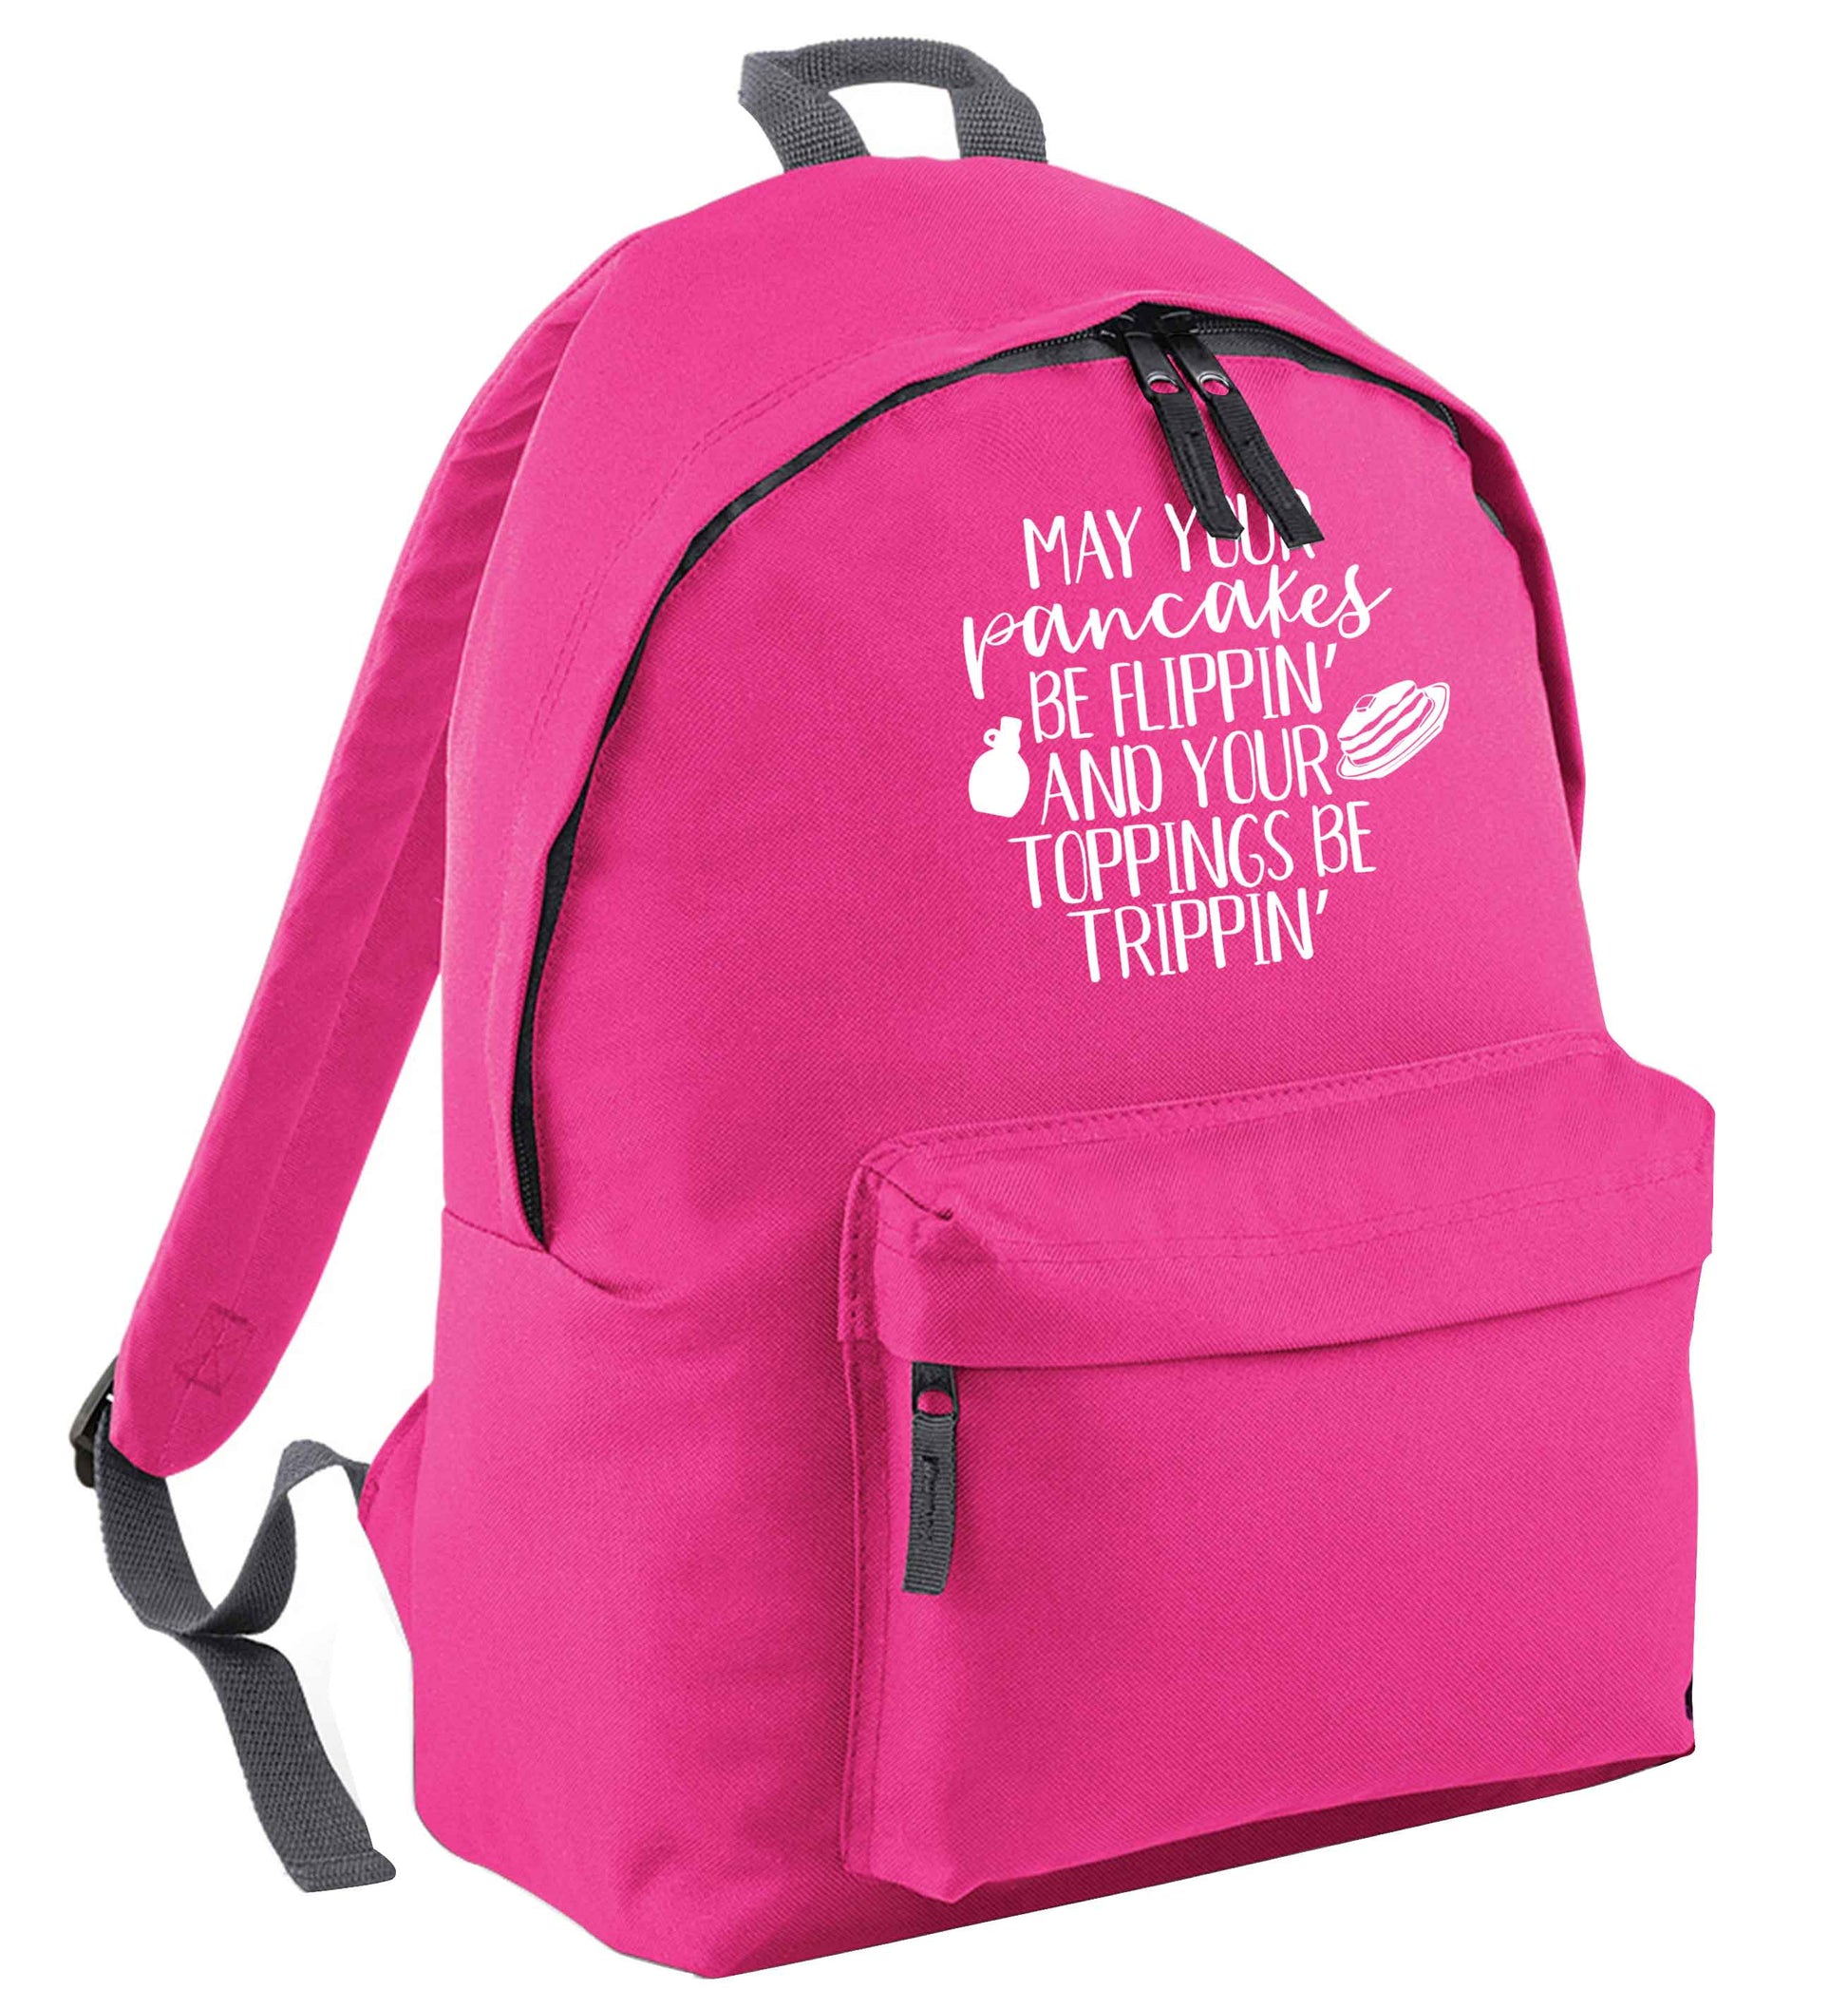 May your pancakes be flippin' and your toppings be trippin' pink childrens backpack